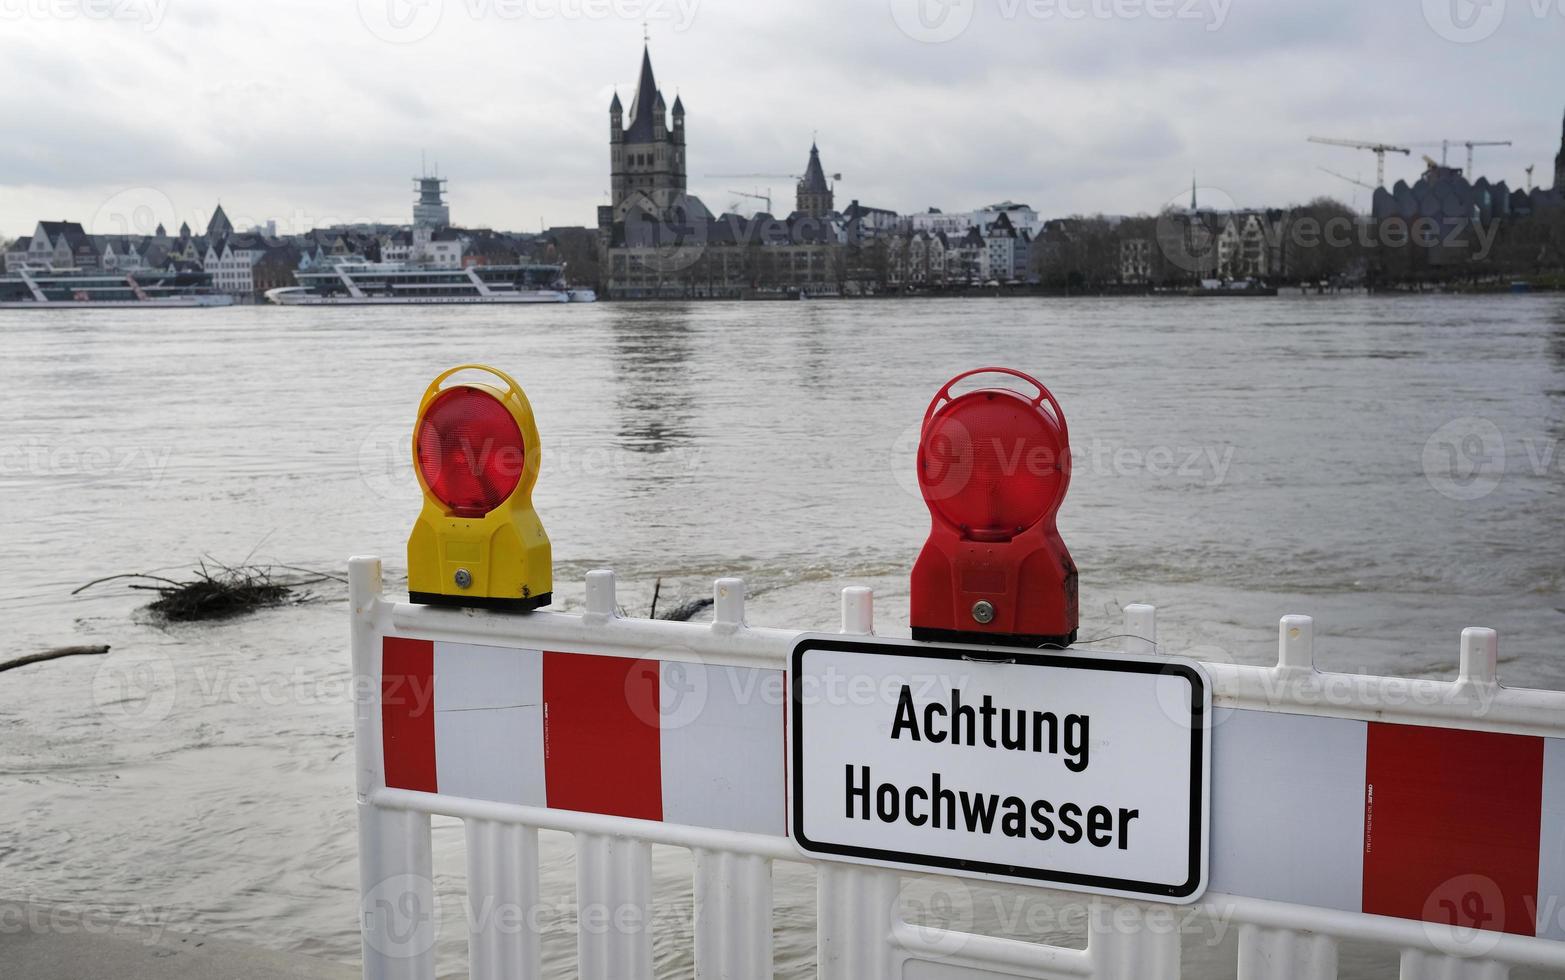 Extreme weather - Warning sign in German at the entrance to a flooded pedestrian zone in Cologne, Germany photo